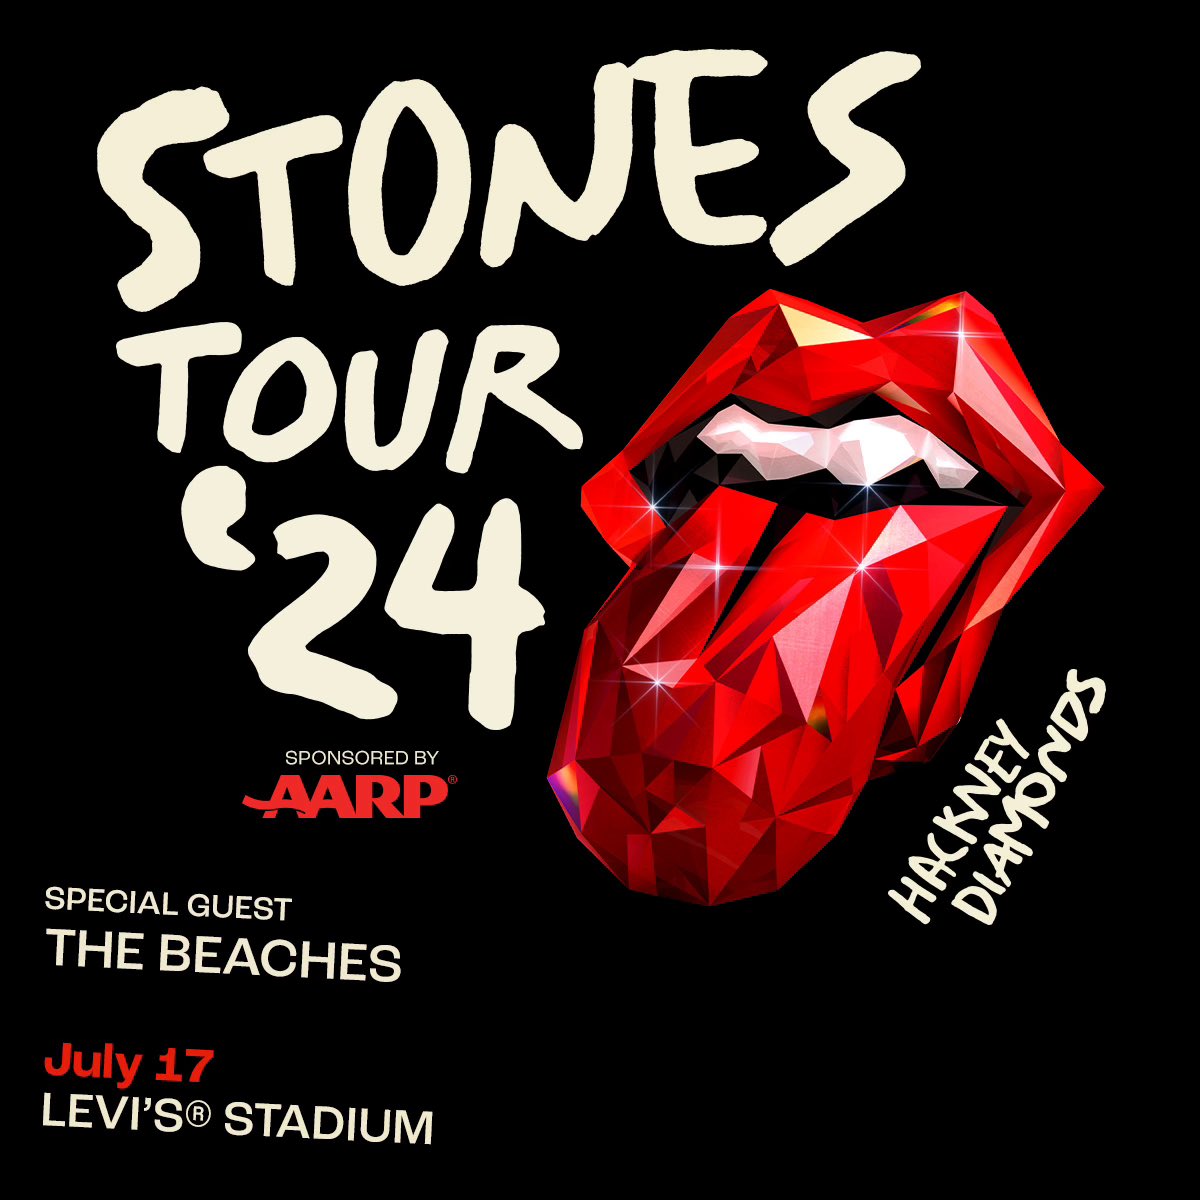 THE BEACHES ARE BACK WITH THE @RollingStones !!!!! Santa Clara, we can’t wait to meet ya - July 17, see ya there !! xoxo ♥️ 👅